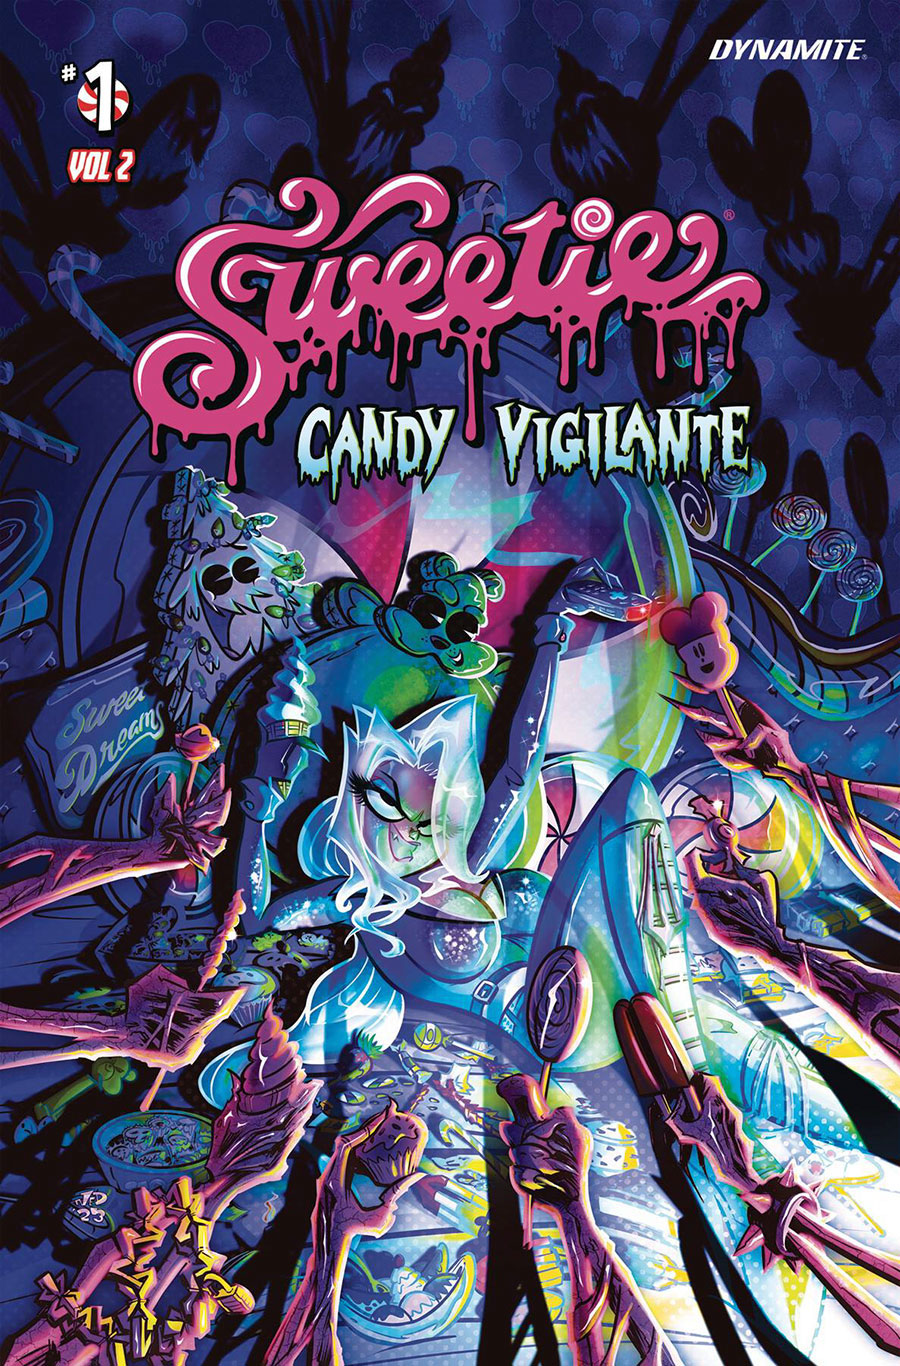 Sweetie Candy Vigilante Vol 2 #1 Cover E Variant Ned Ivory Cover